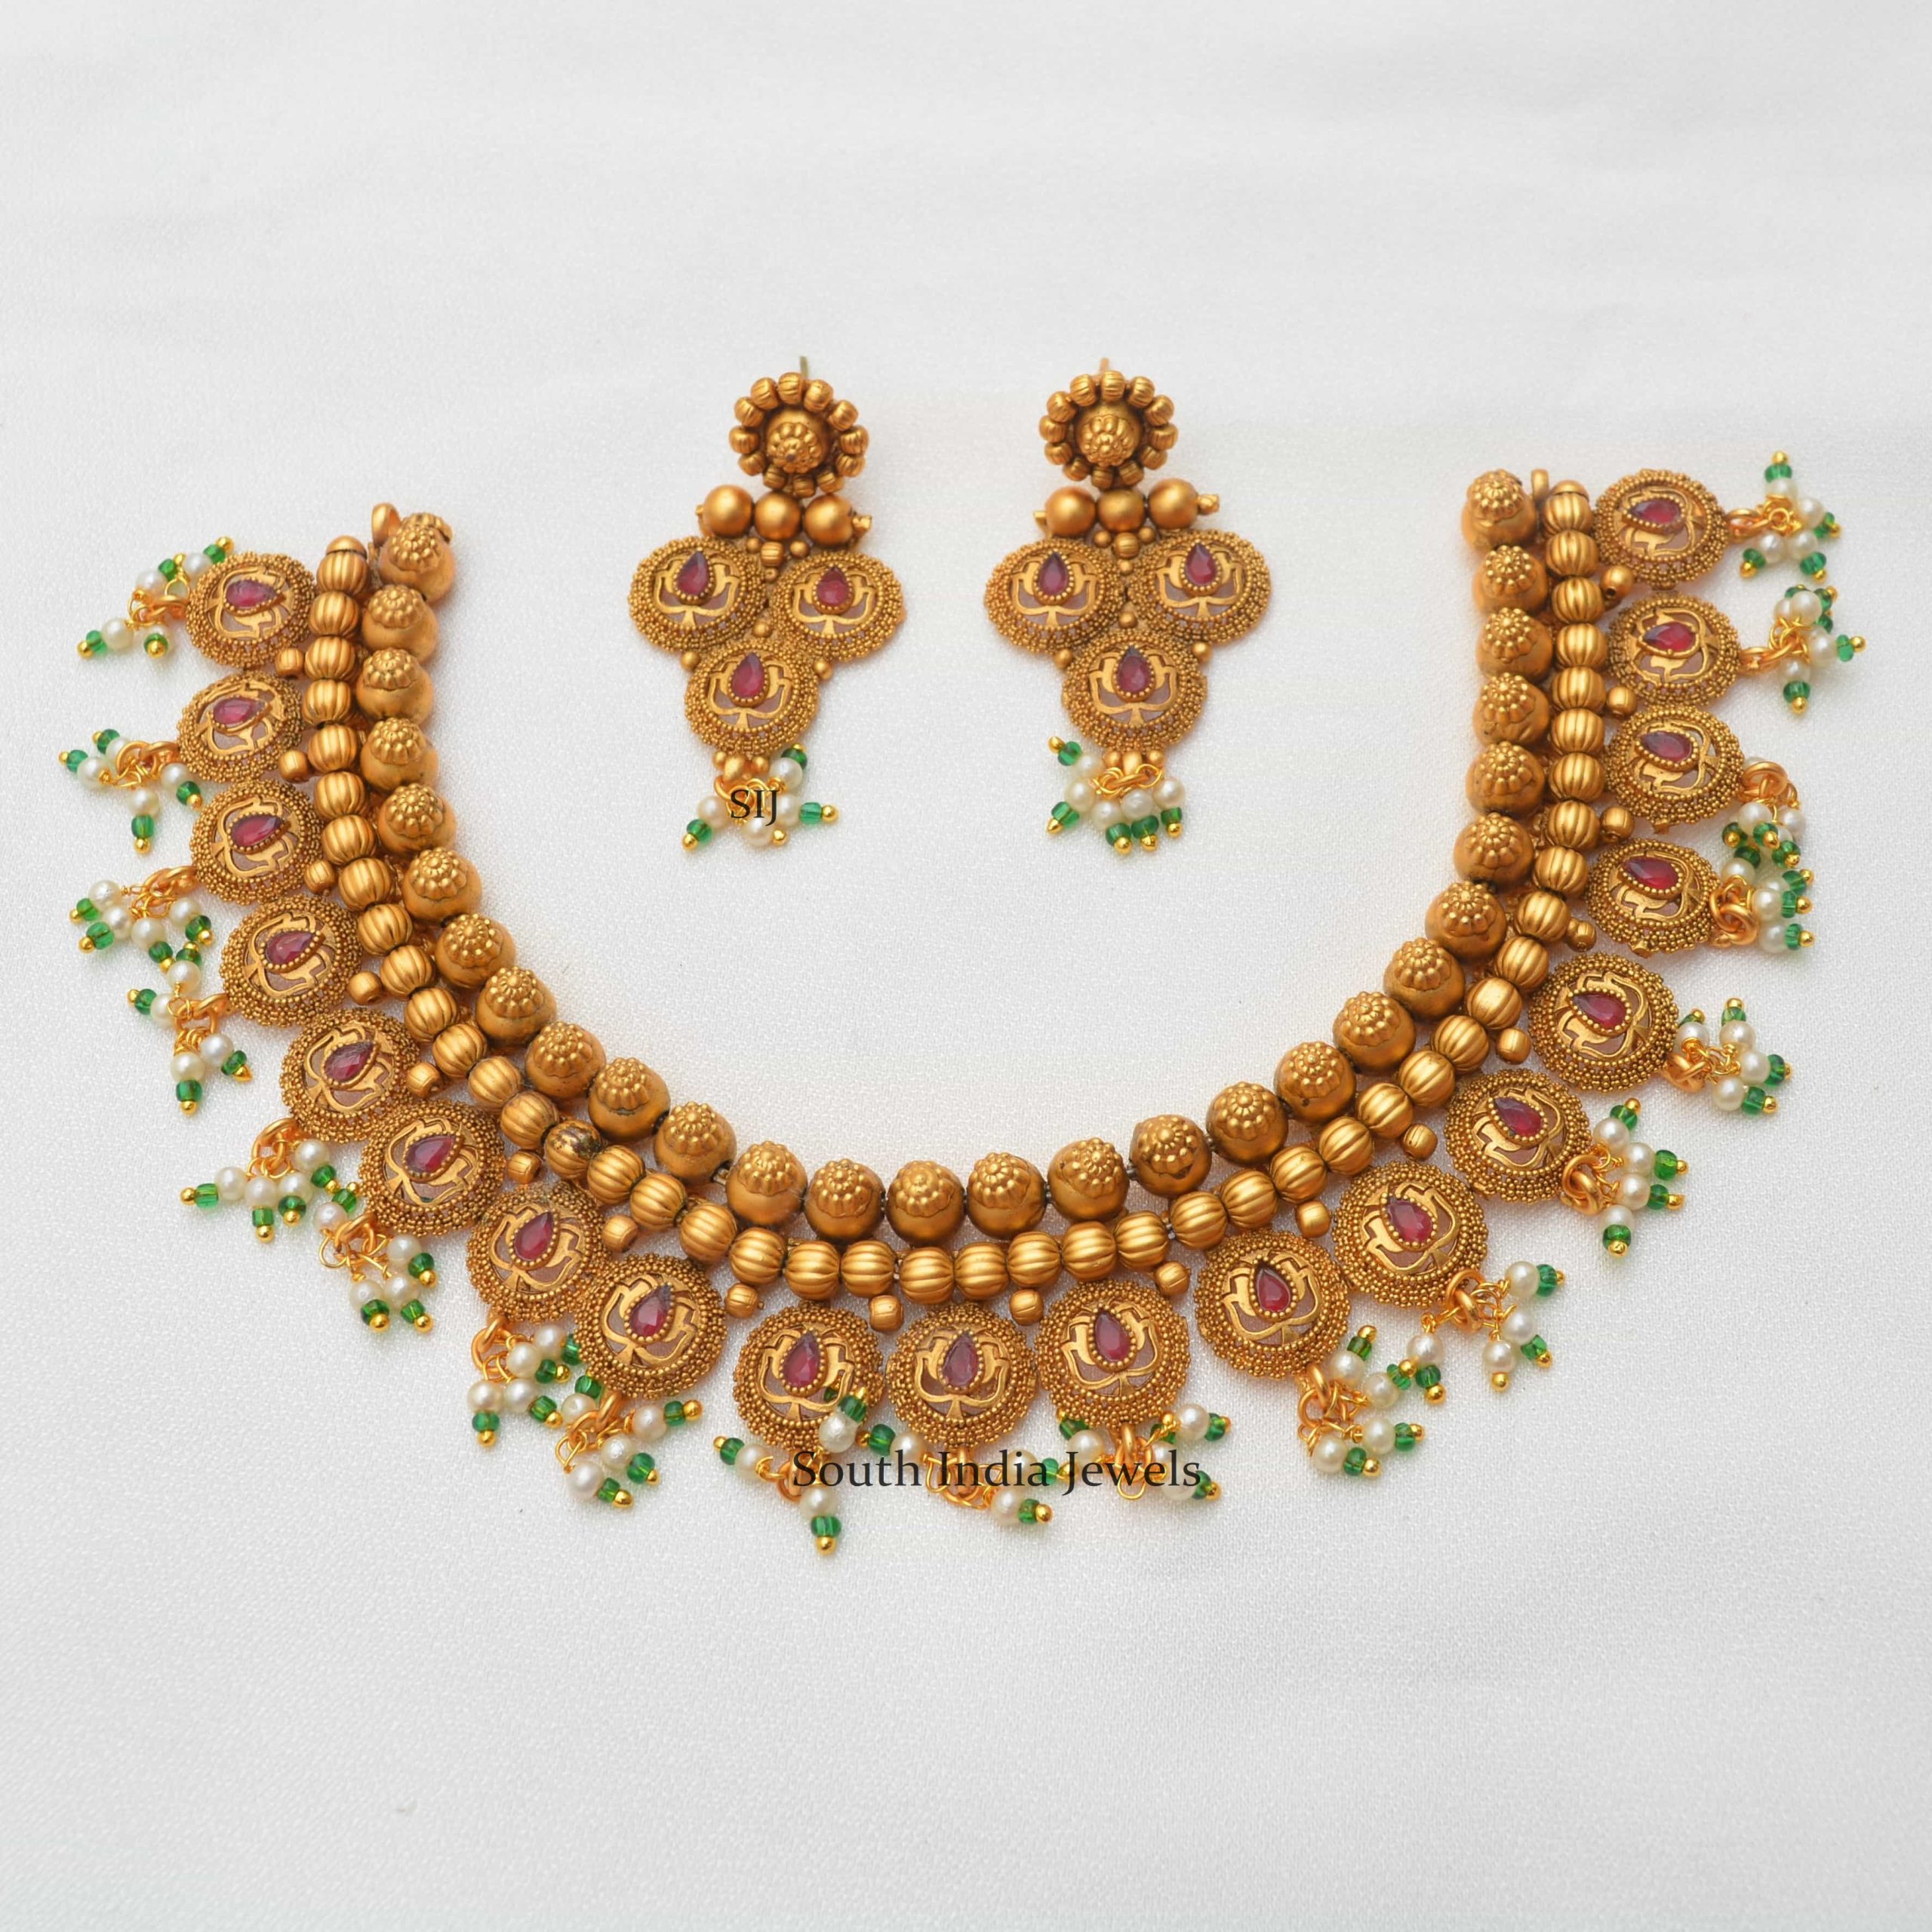 Pearl Design Necklace - South India Jewels